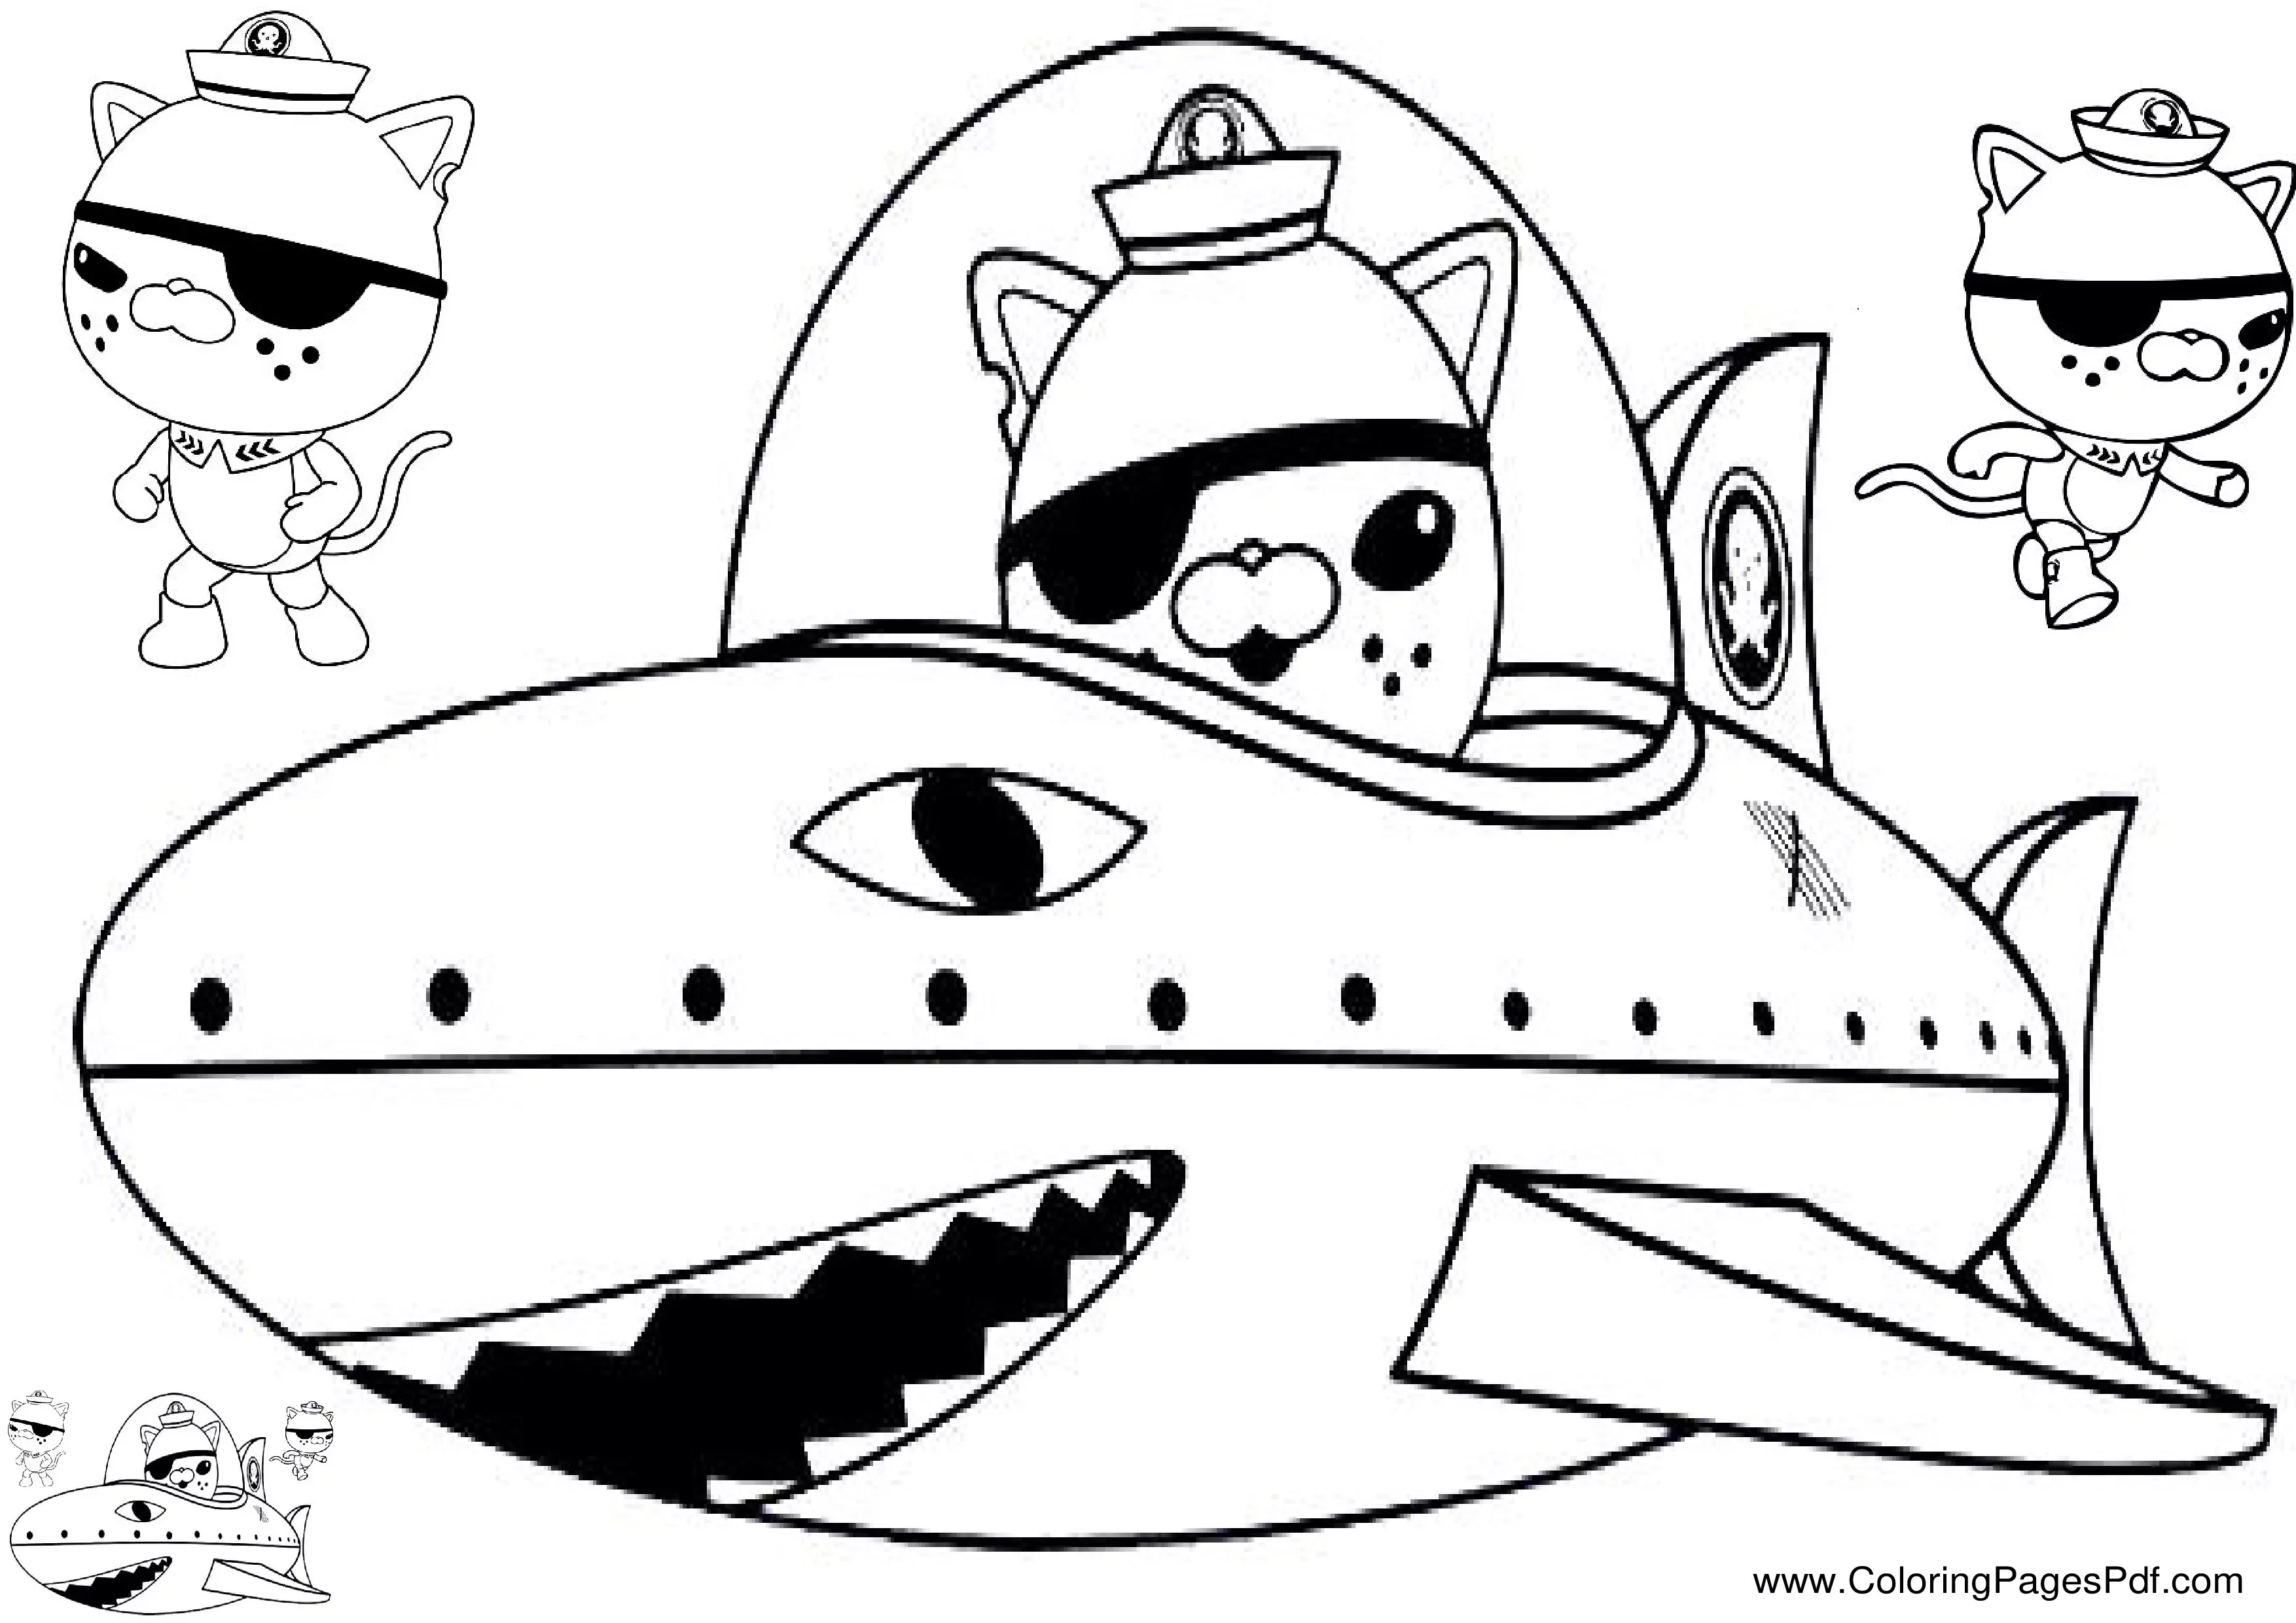 Kwazii octonauts coloring pages